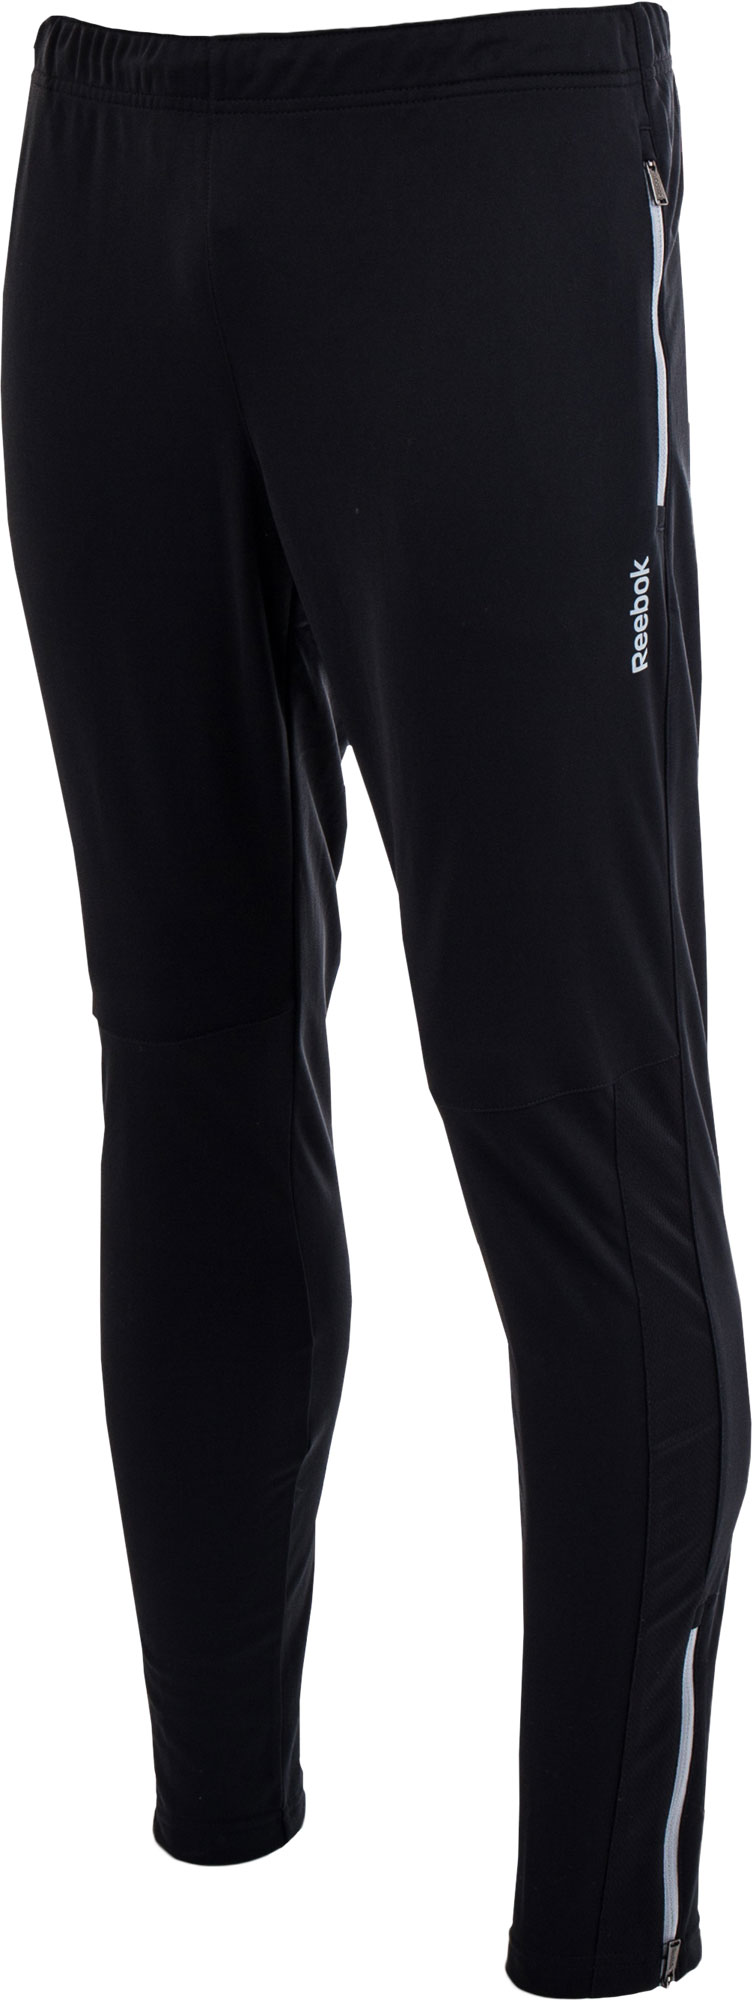 https://i.sportisimo.com/products/images/313/313465/full/reebok-sport-essentials-trackster-pant_4.jpg